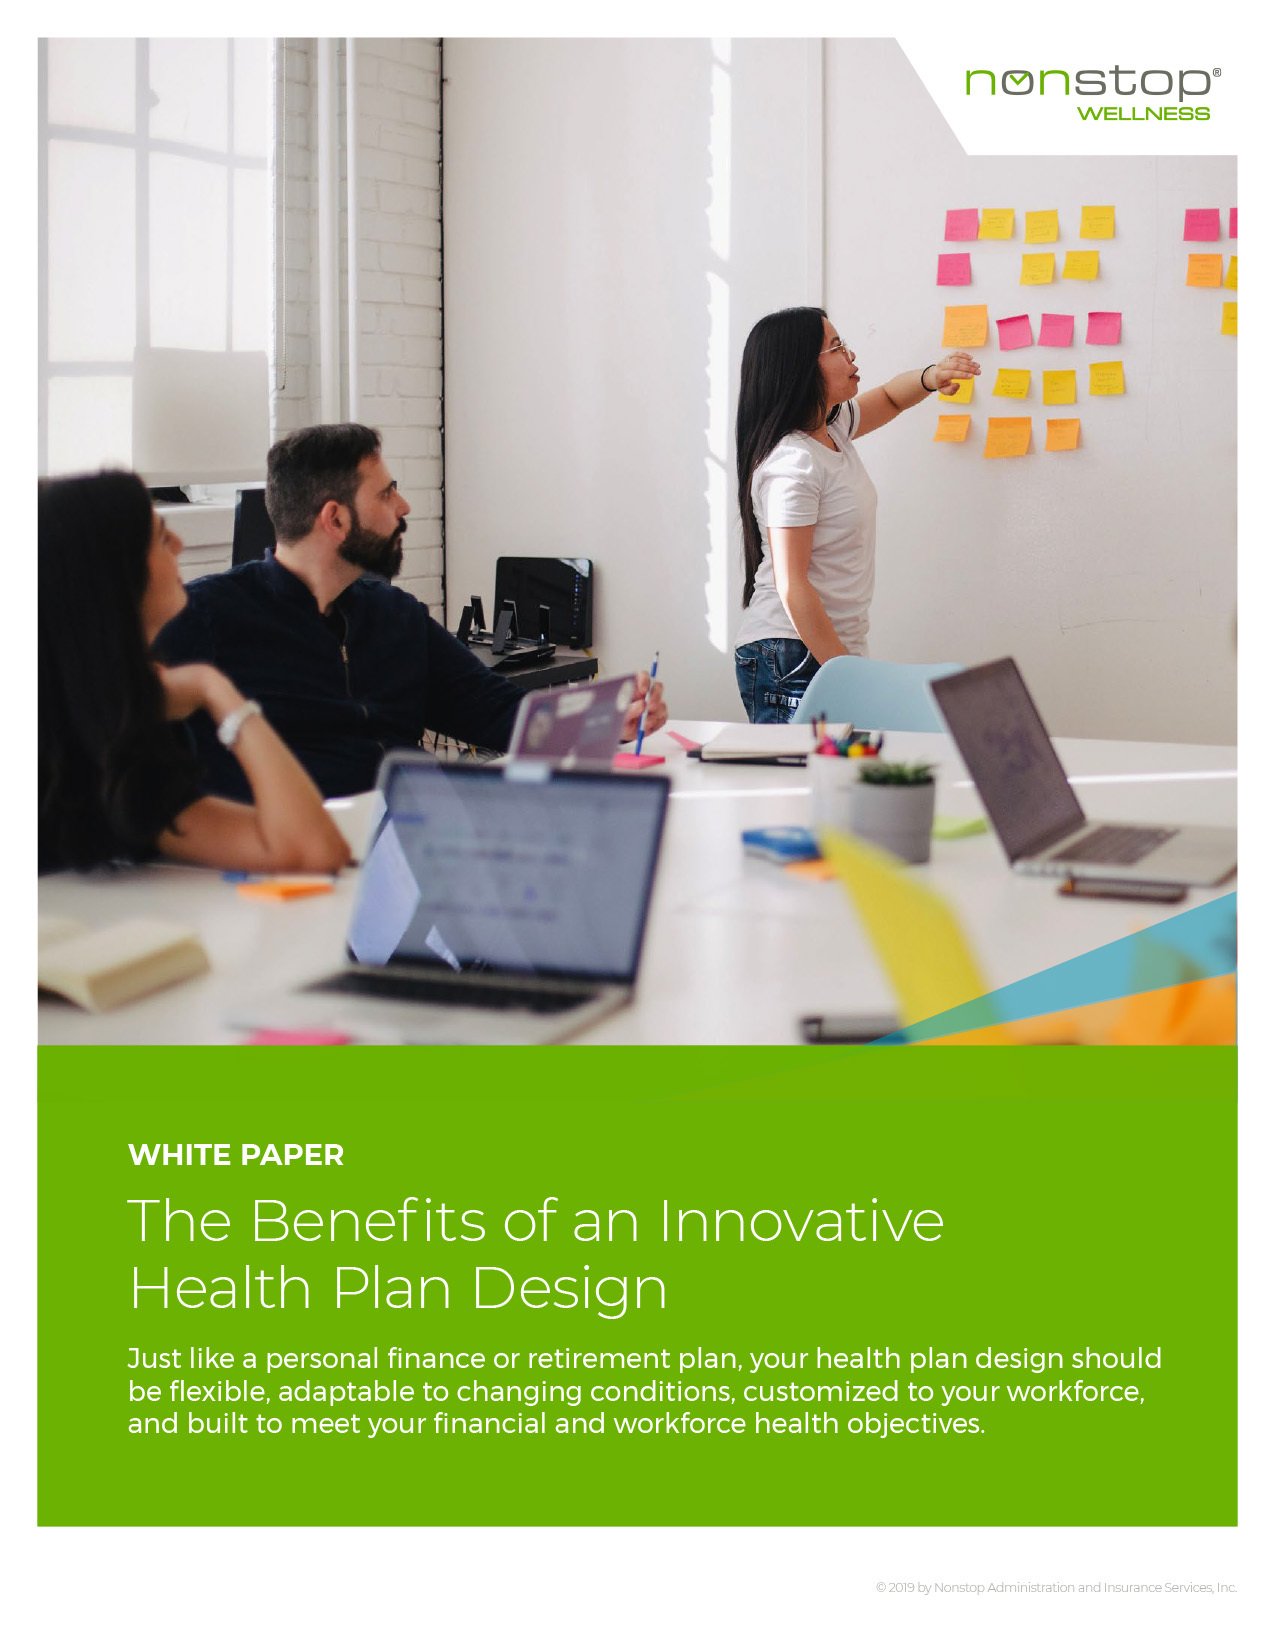 White Paper - The Benefits of an Innovative Health Plan Design